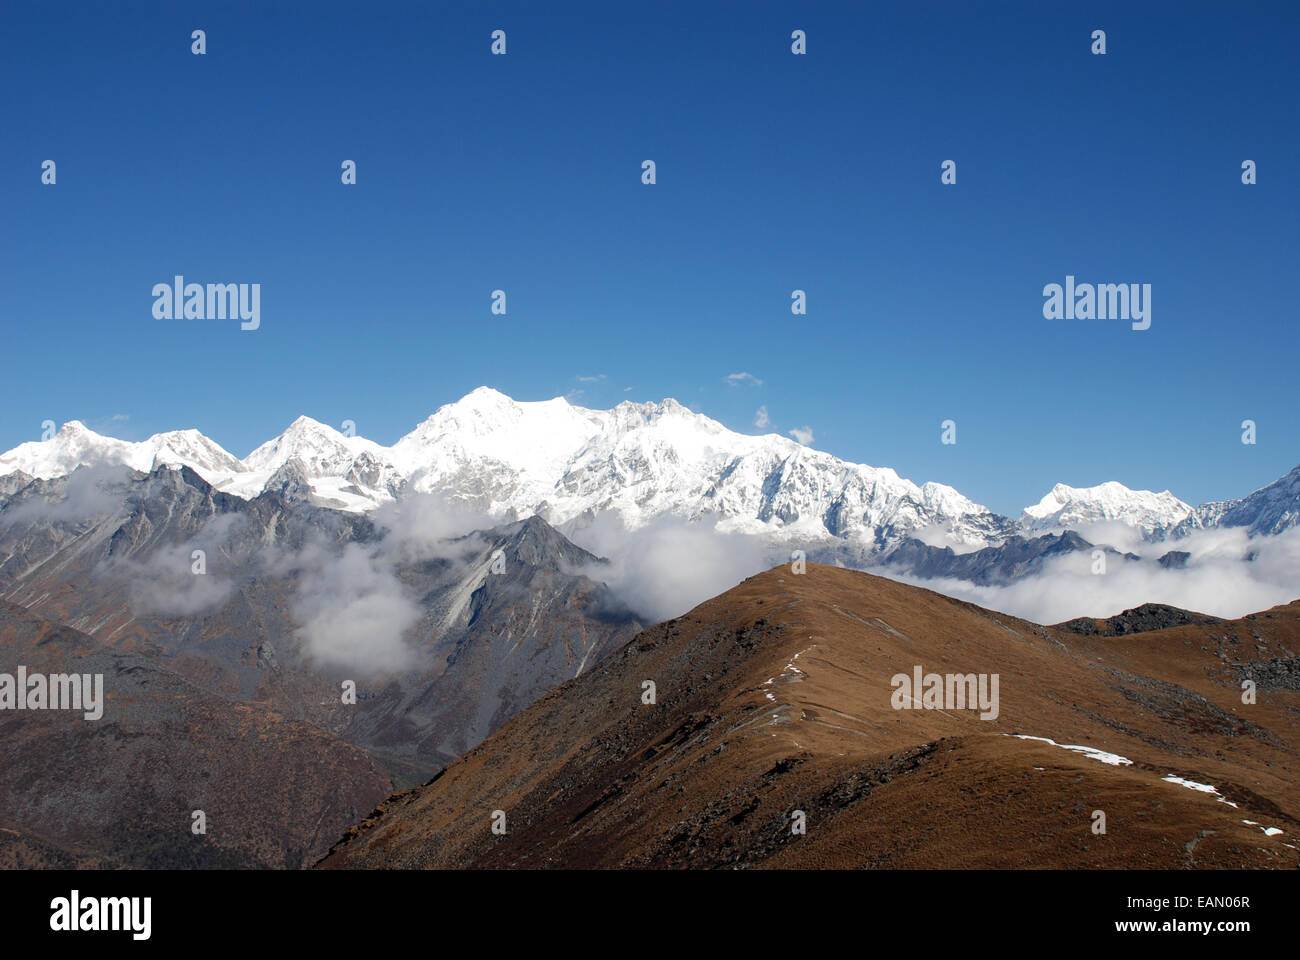 Kangchenjunga and the surrounding high Himalayan peaks are seen from A high point on the Singalila ridge in India Stock Photo